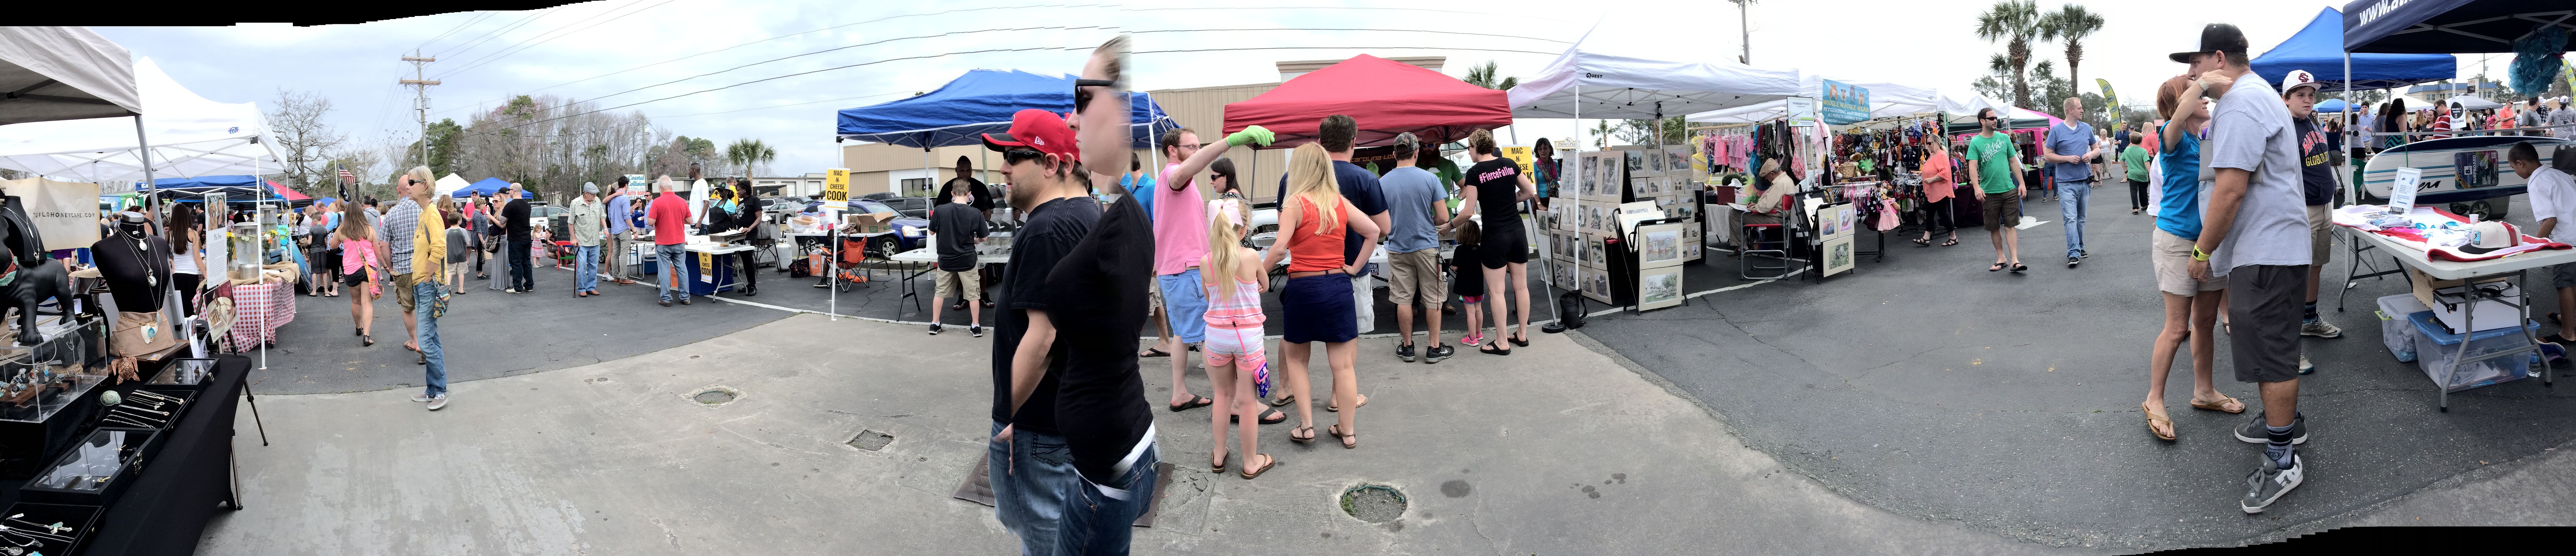 Just one glimpse of a potion of the Surf Dreams Foundation Mac-N-Cheese Cook Off. You can see some of the macaroni and cheese vendors on the left and some of the non-mac and cheese vendors on the right.